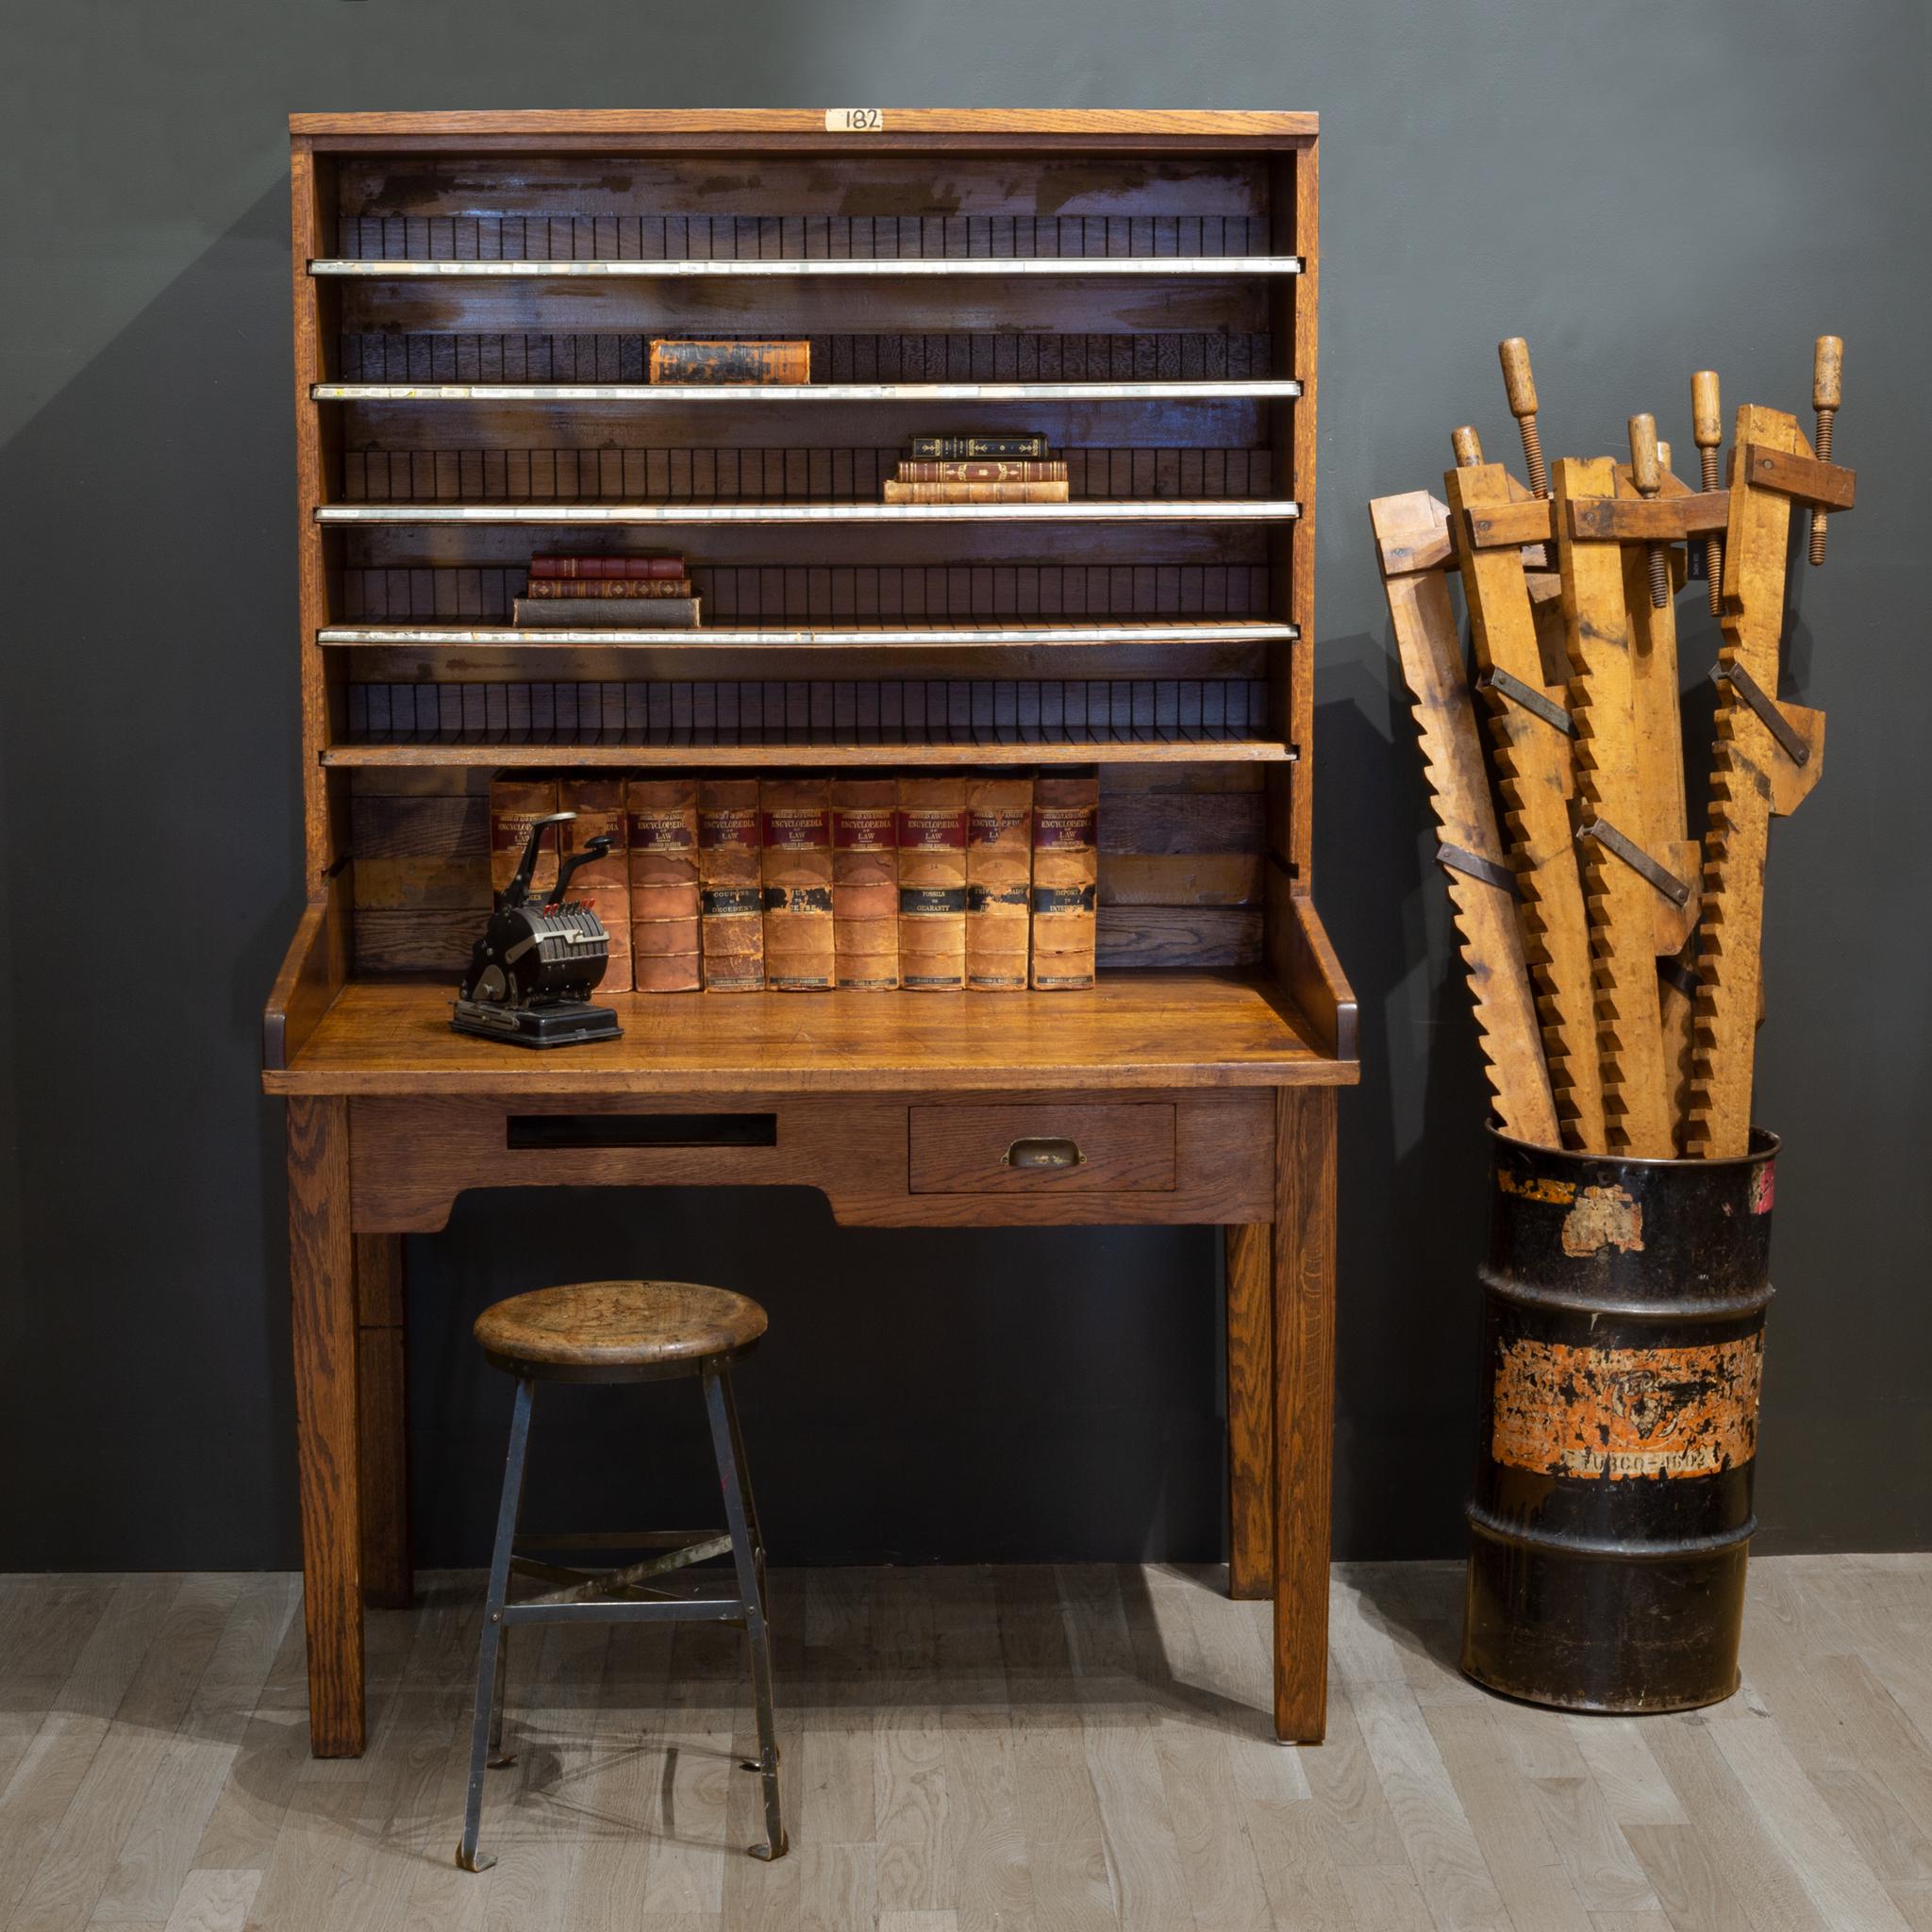 About:

An antique solid oak postal desk with several removable shelves, drawer with brass handle, document slot and postal messenger bag hook underneath. Each shelf has slots for letters and original labels. The desk is stamped under the drawer